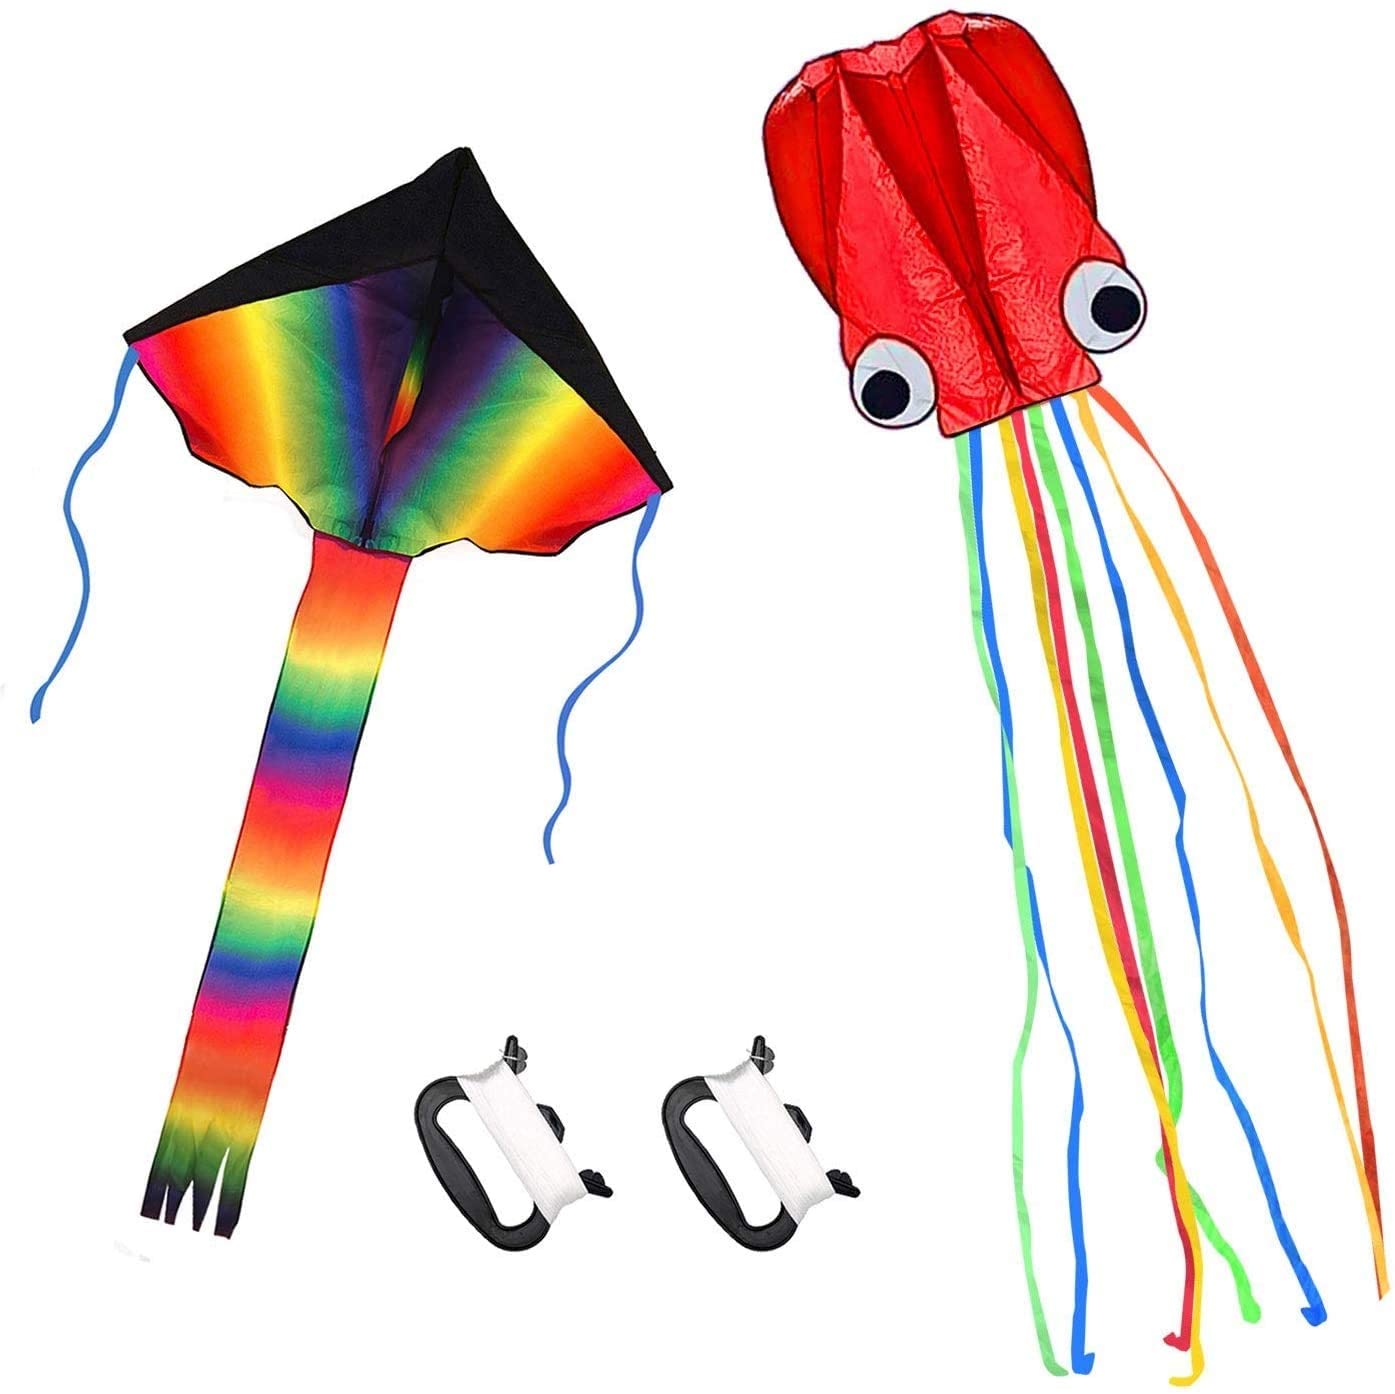 Listenman, Listenman 2 Pack Kites - Large Rainbow Delta Kite and Red Mollusc Octopus with Long Colorful Tail for Children Outdoor GameActivitiesBeach Trip Great Gift to Kids Childhood Precious Memories